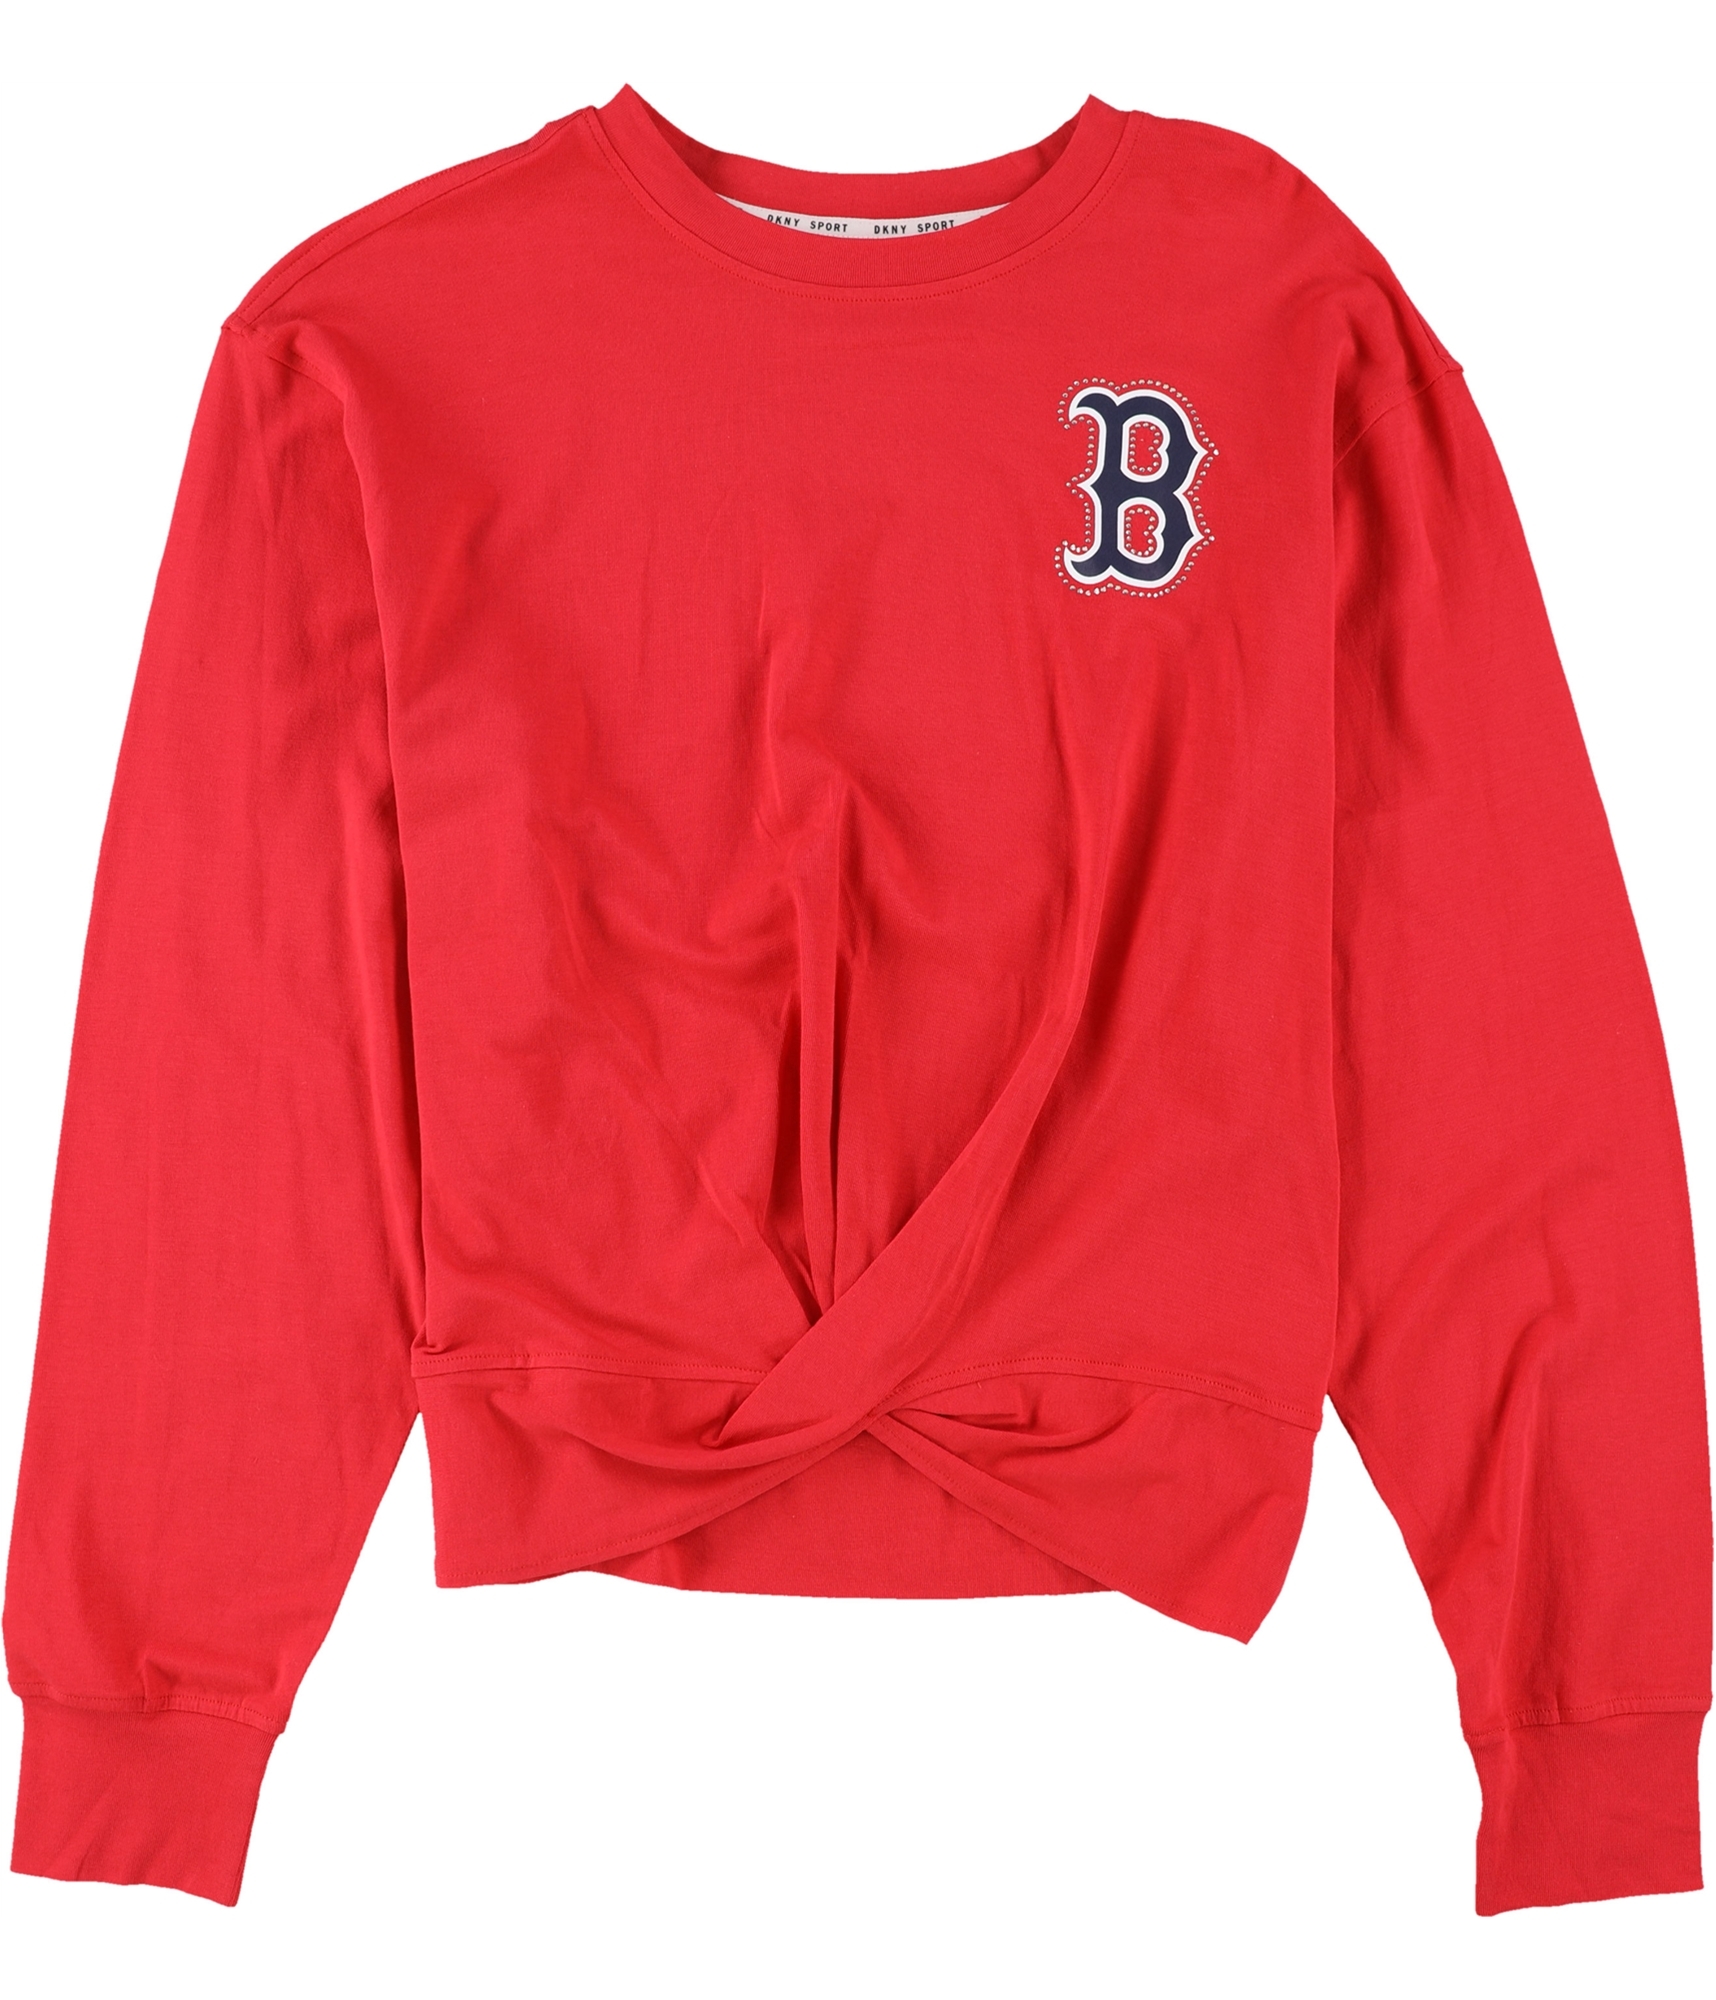 Buy a Womens DKNY Boston Red Sox Graphic T-Shirt Online